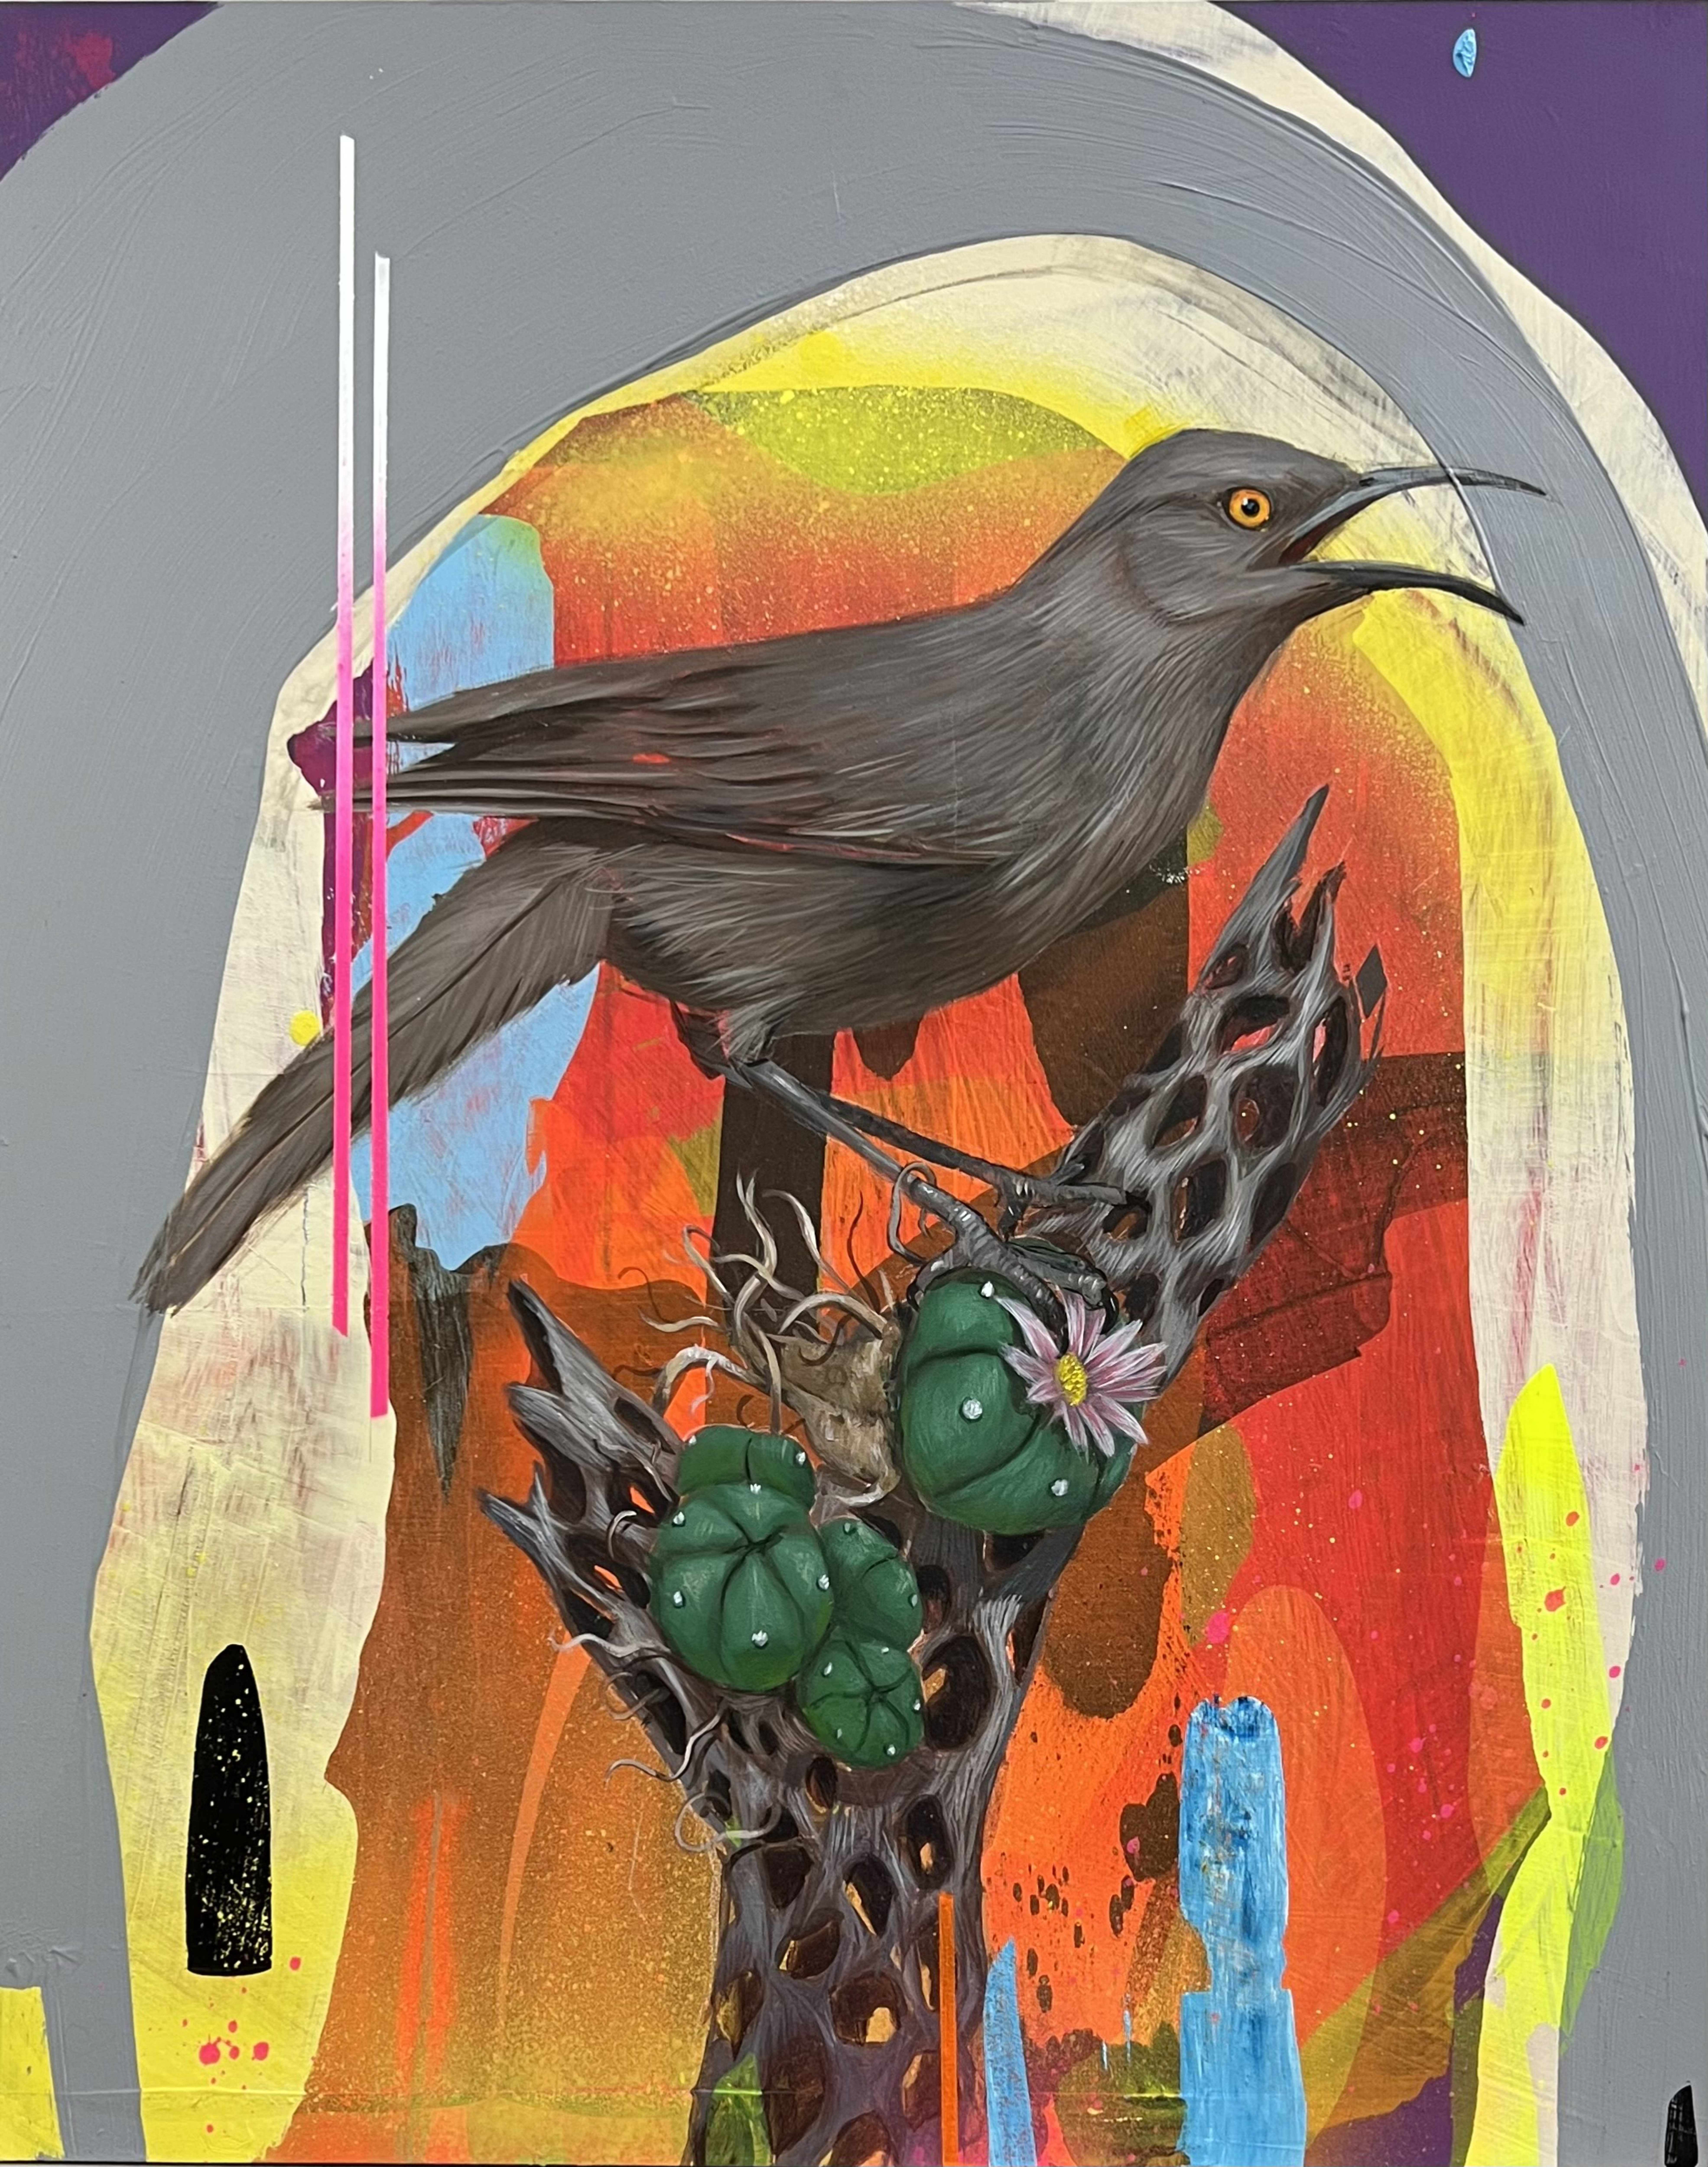 painting of a bird with abstract components by Frank Gonzales